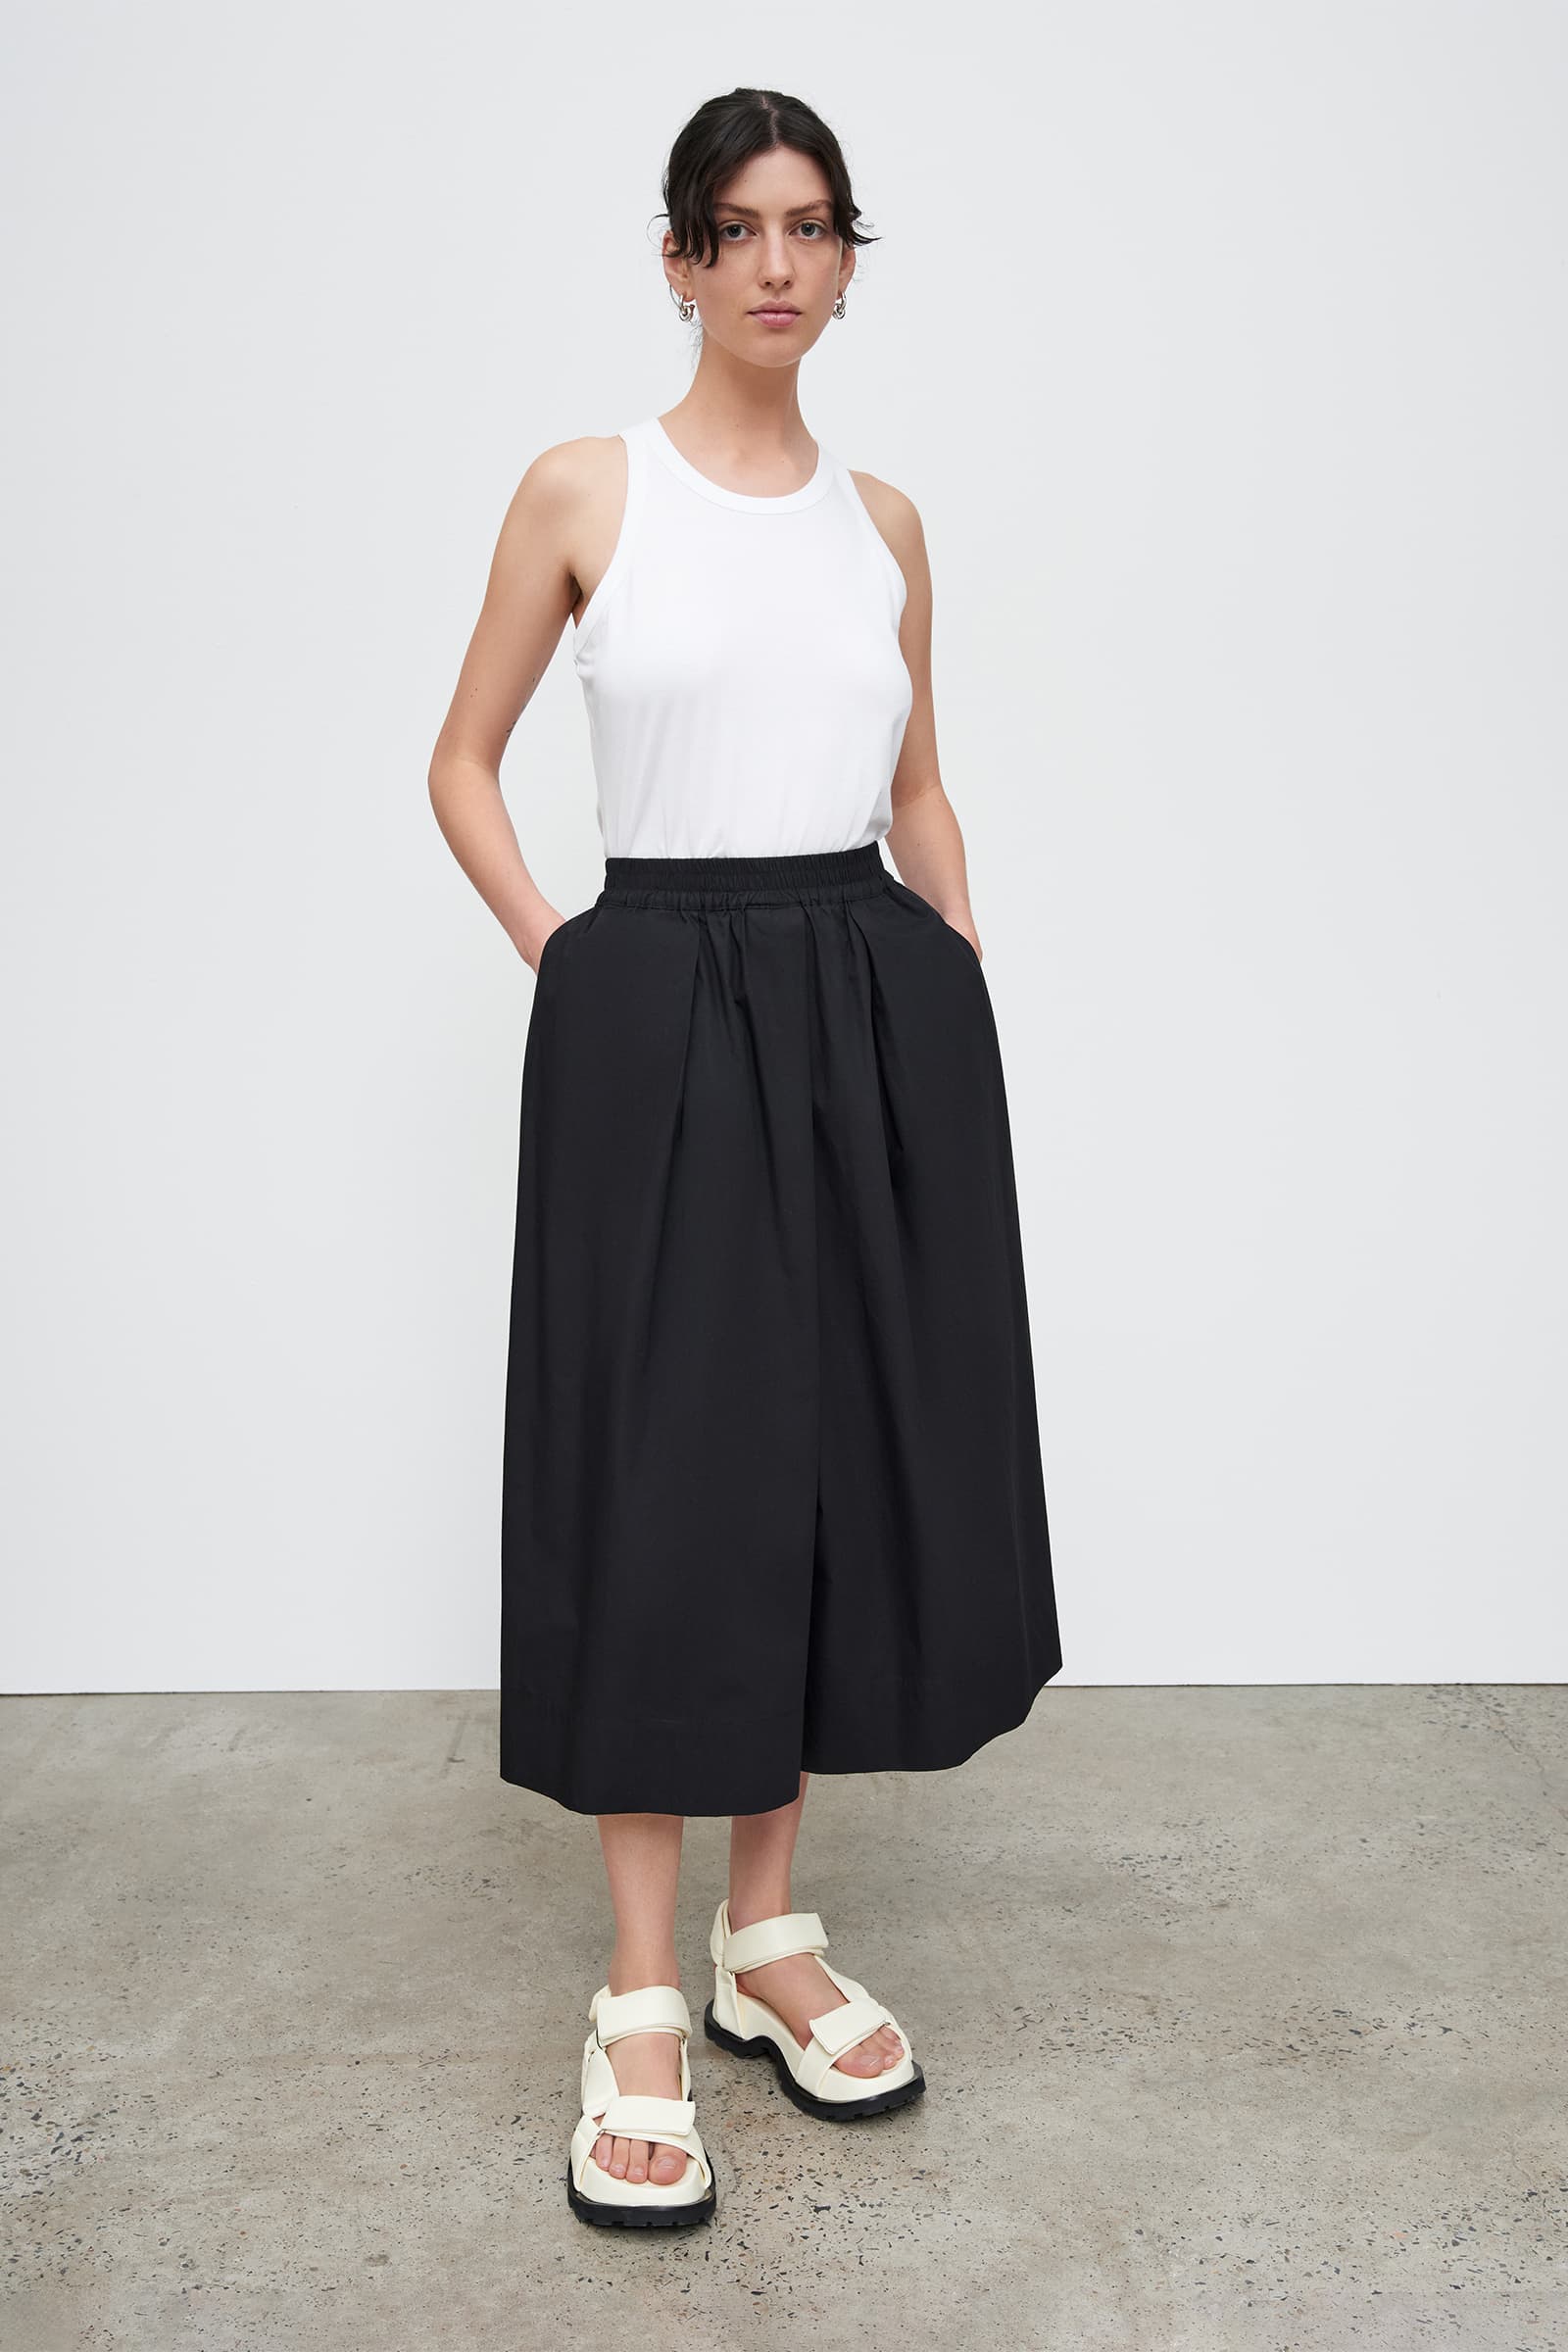 “From Day to Night: Transitioning Your Look with Culottes”